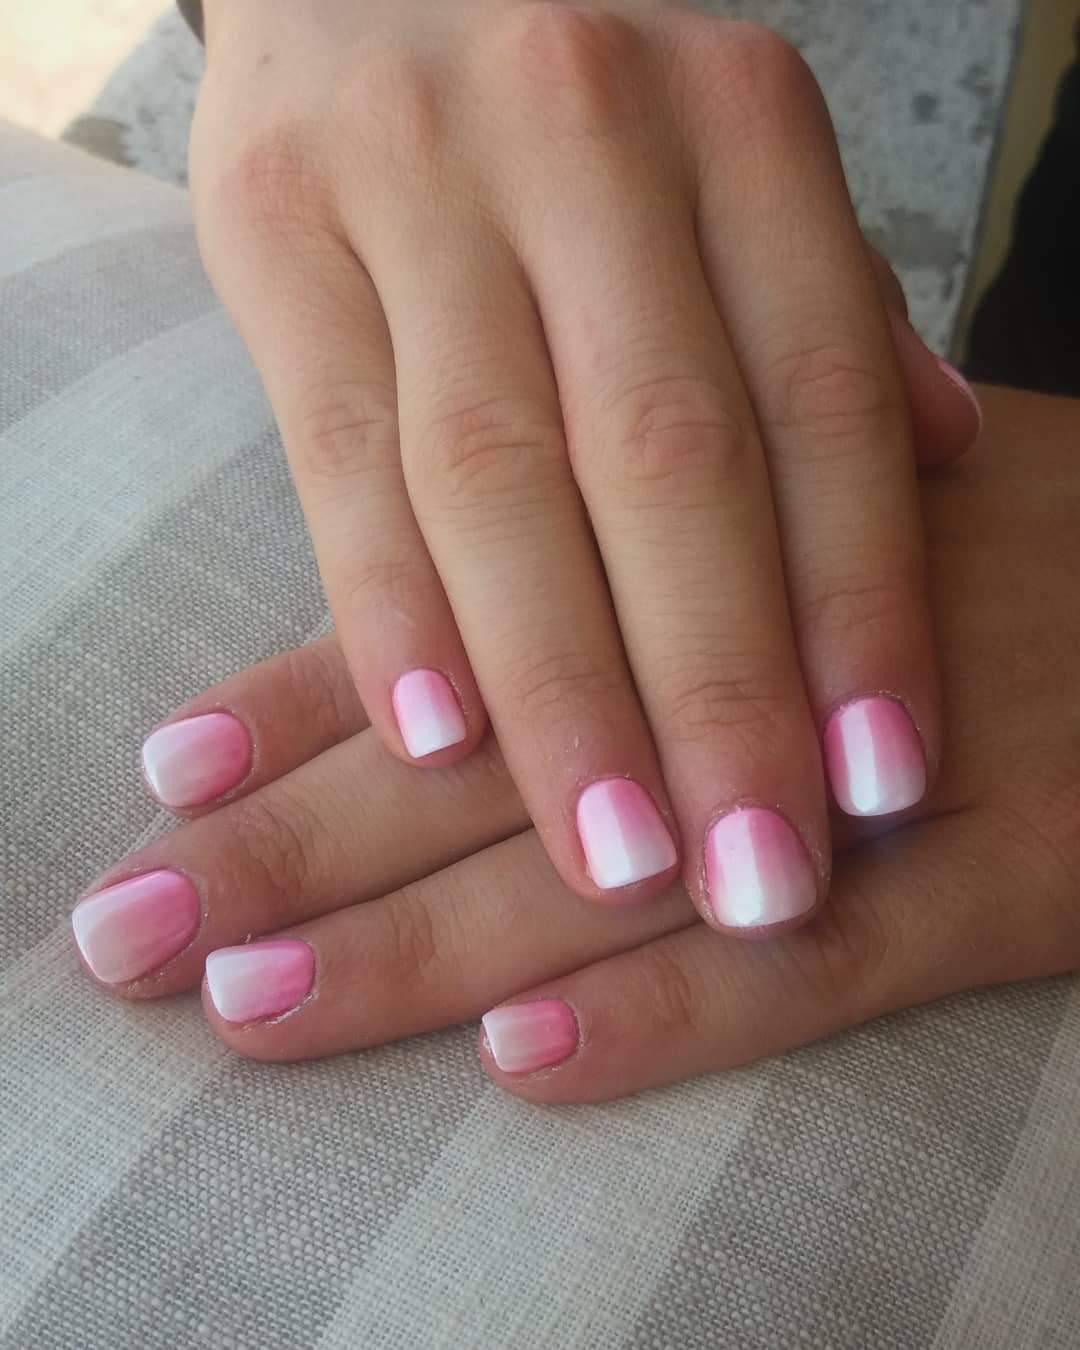 Ombre nail art. Pic by xrisa_knails